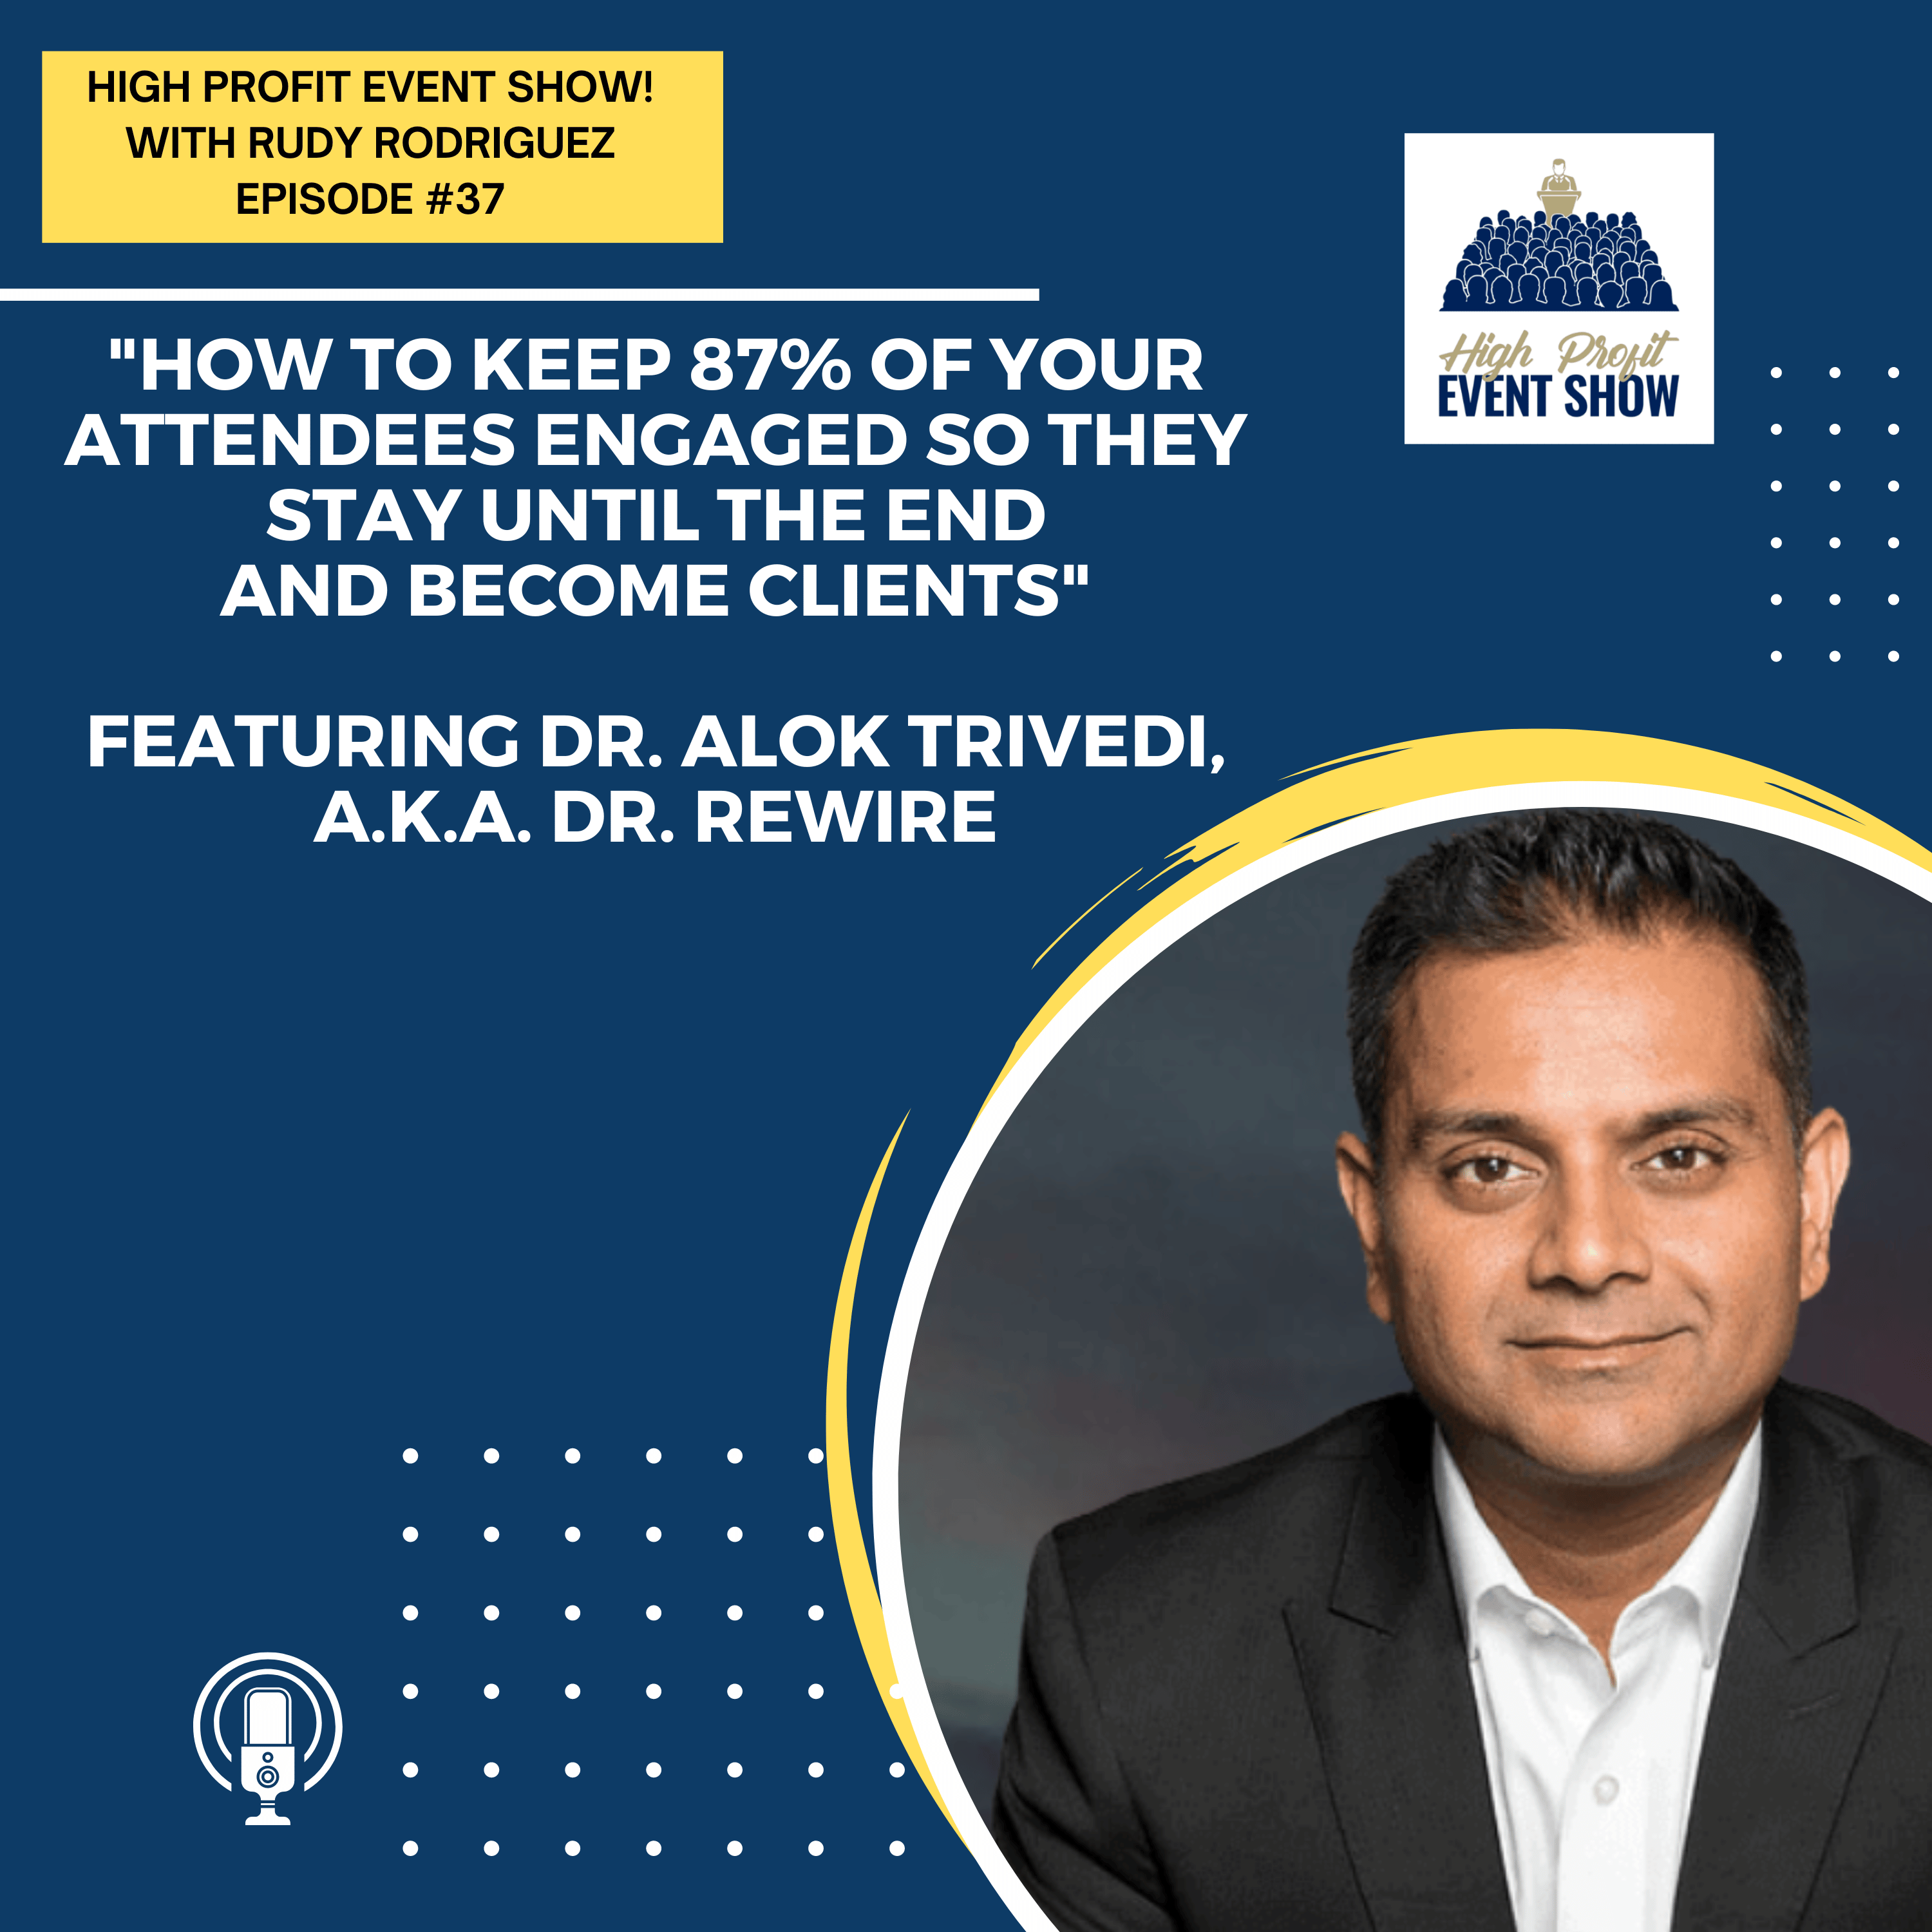 Episode 37: How to Keep 87% of Your Attendees Engaged So They Stay Until the End and Become Clients with Dr. Alok Trivedi!